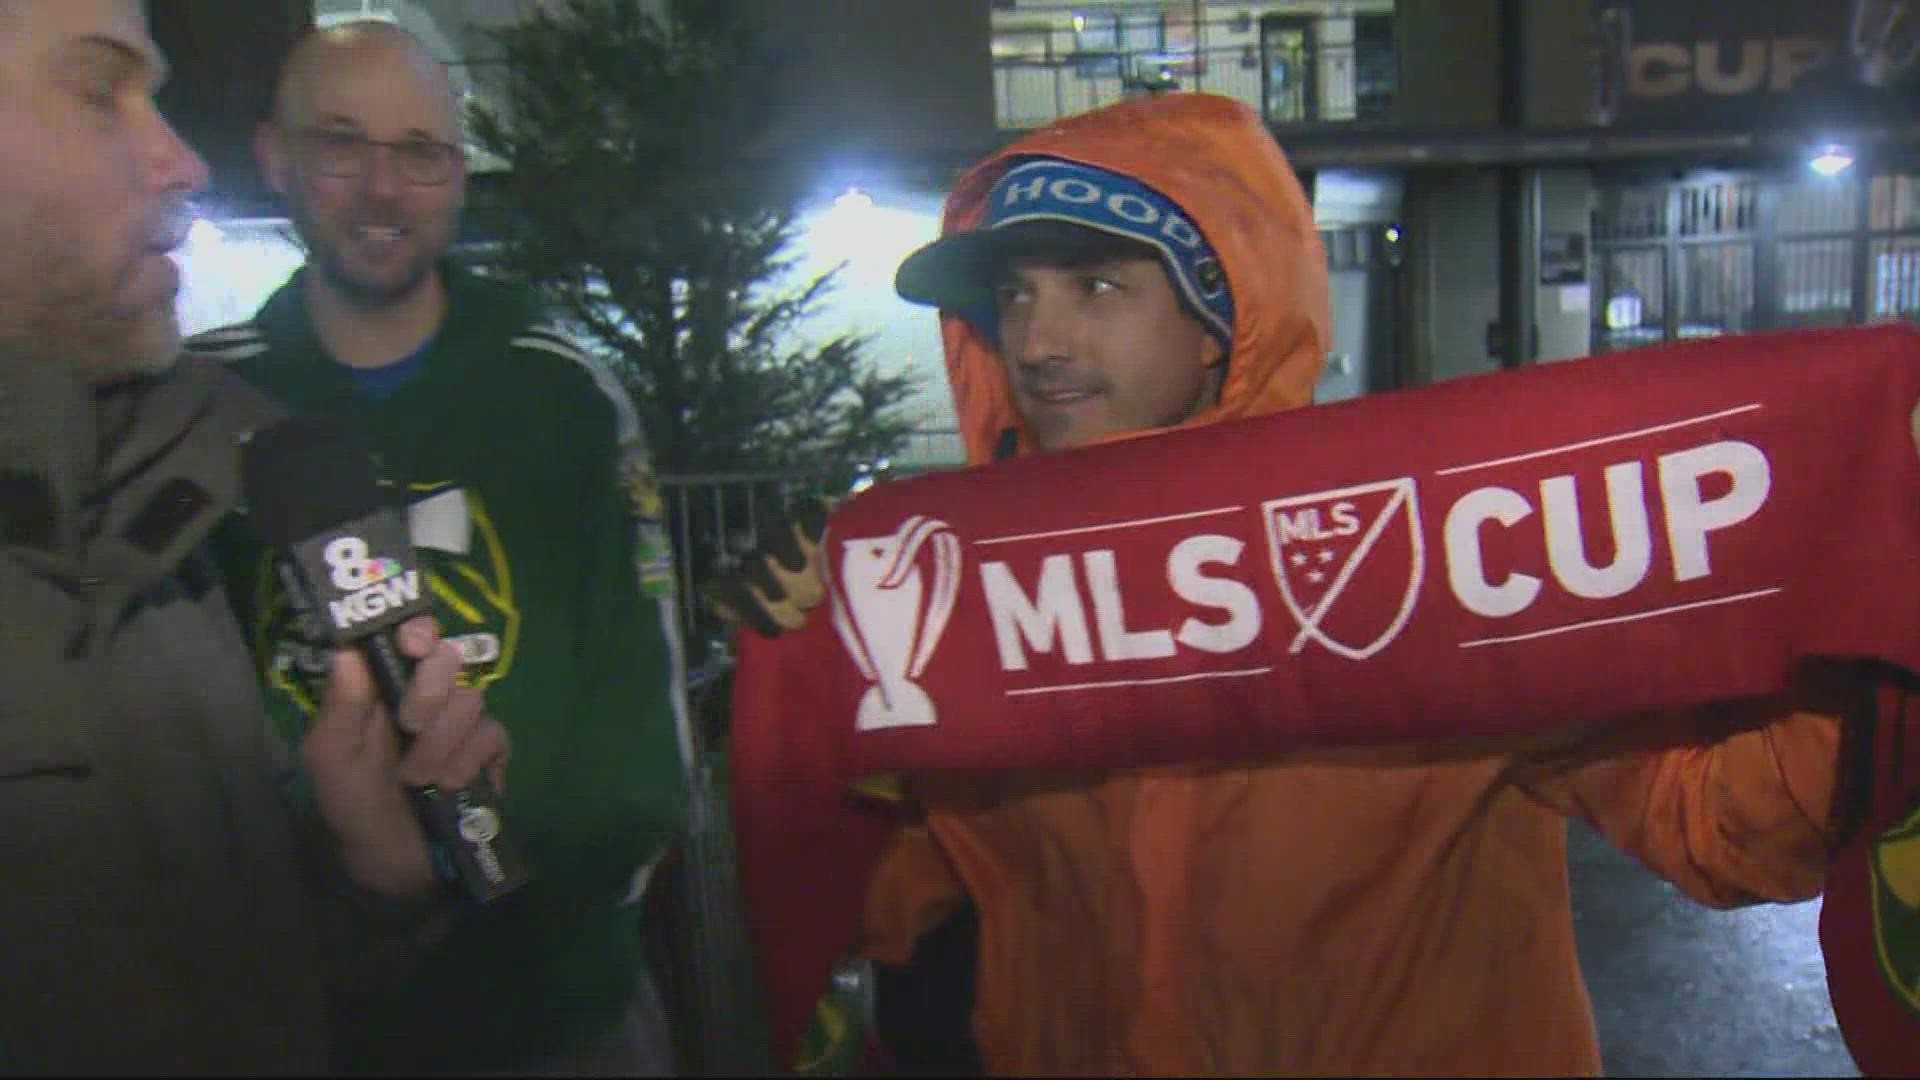 As one fan told KGW's Devon Haskins, getting to watch an MLS Cup final in person is a once-in-a-lifetime opportunity.